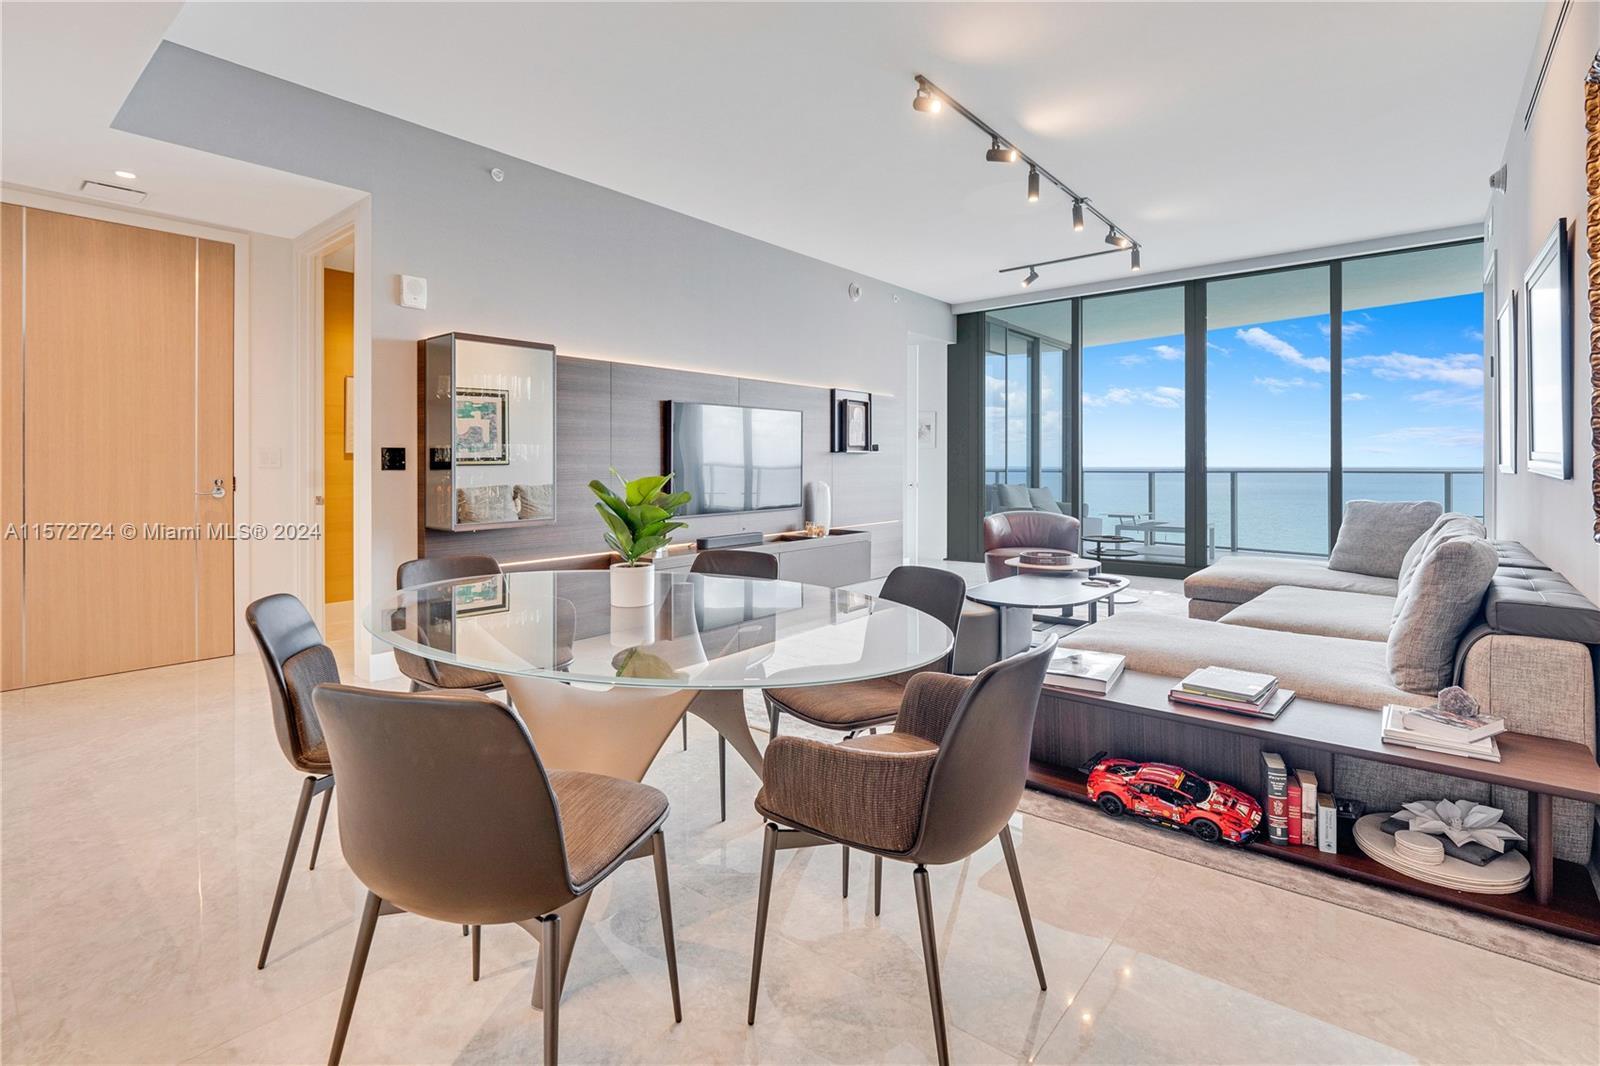 Introducing an exquisite unit at the Ritz Carlton in Sunny Isles Beach. This sophisticated and metic